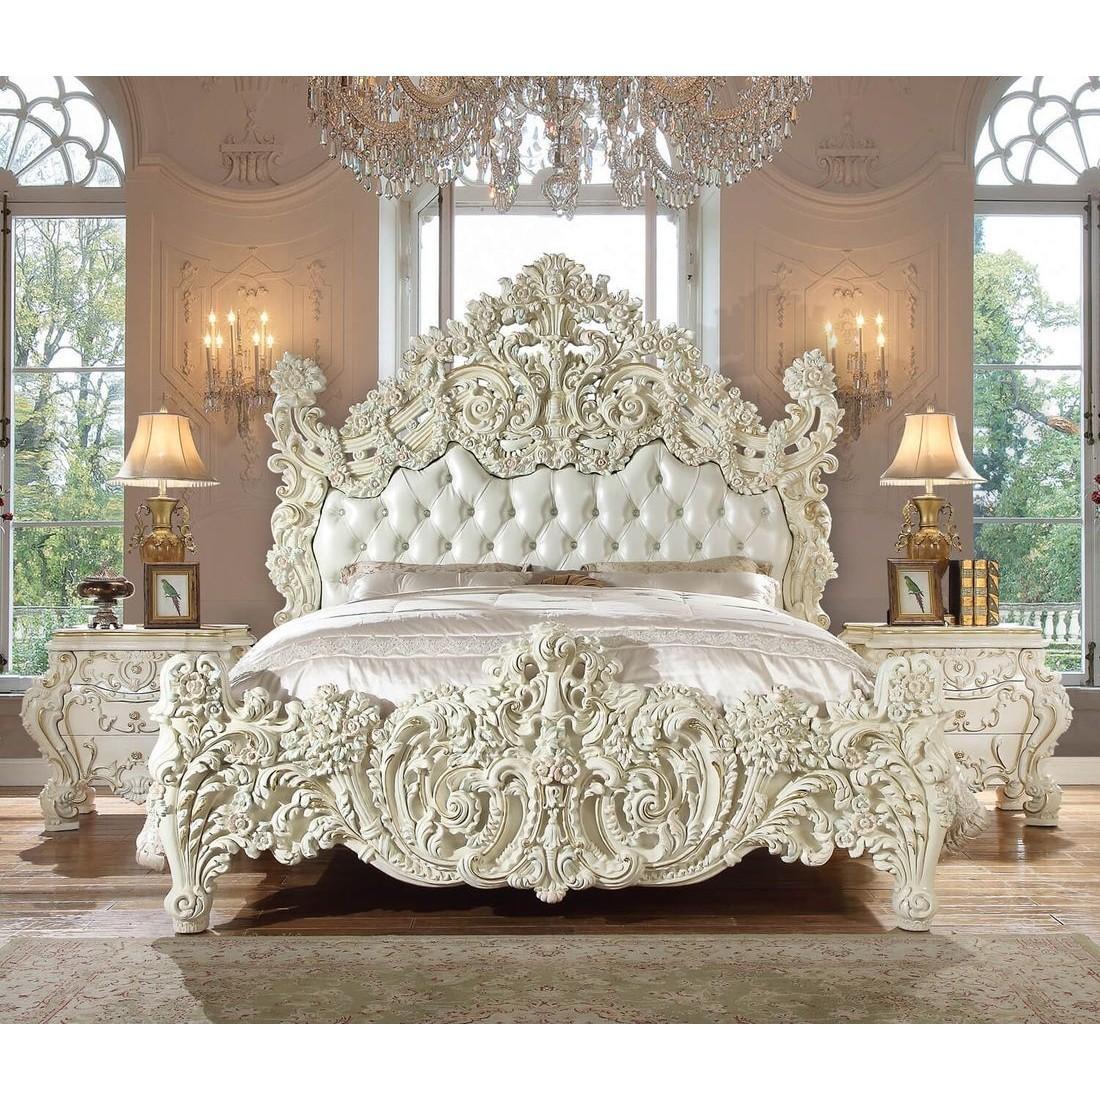 Traditional Sleigh Bedroom Set HD-8089 HD-CK8089-3PC in White, Gold Faux Leather